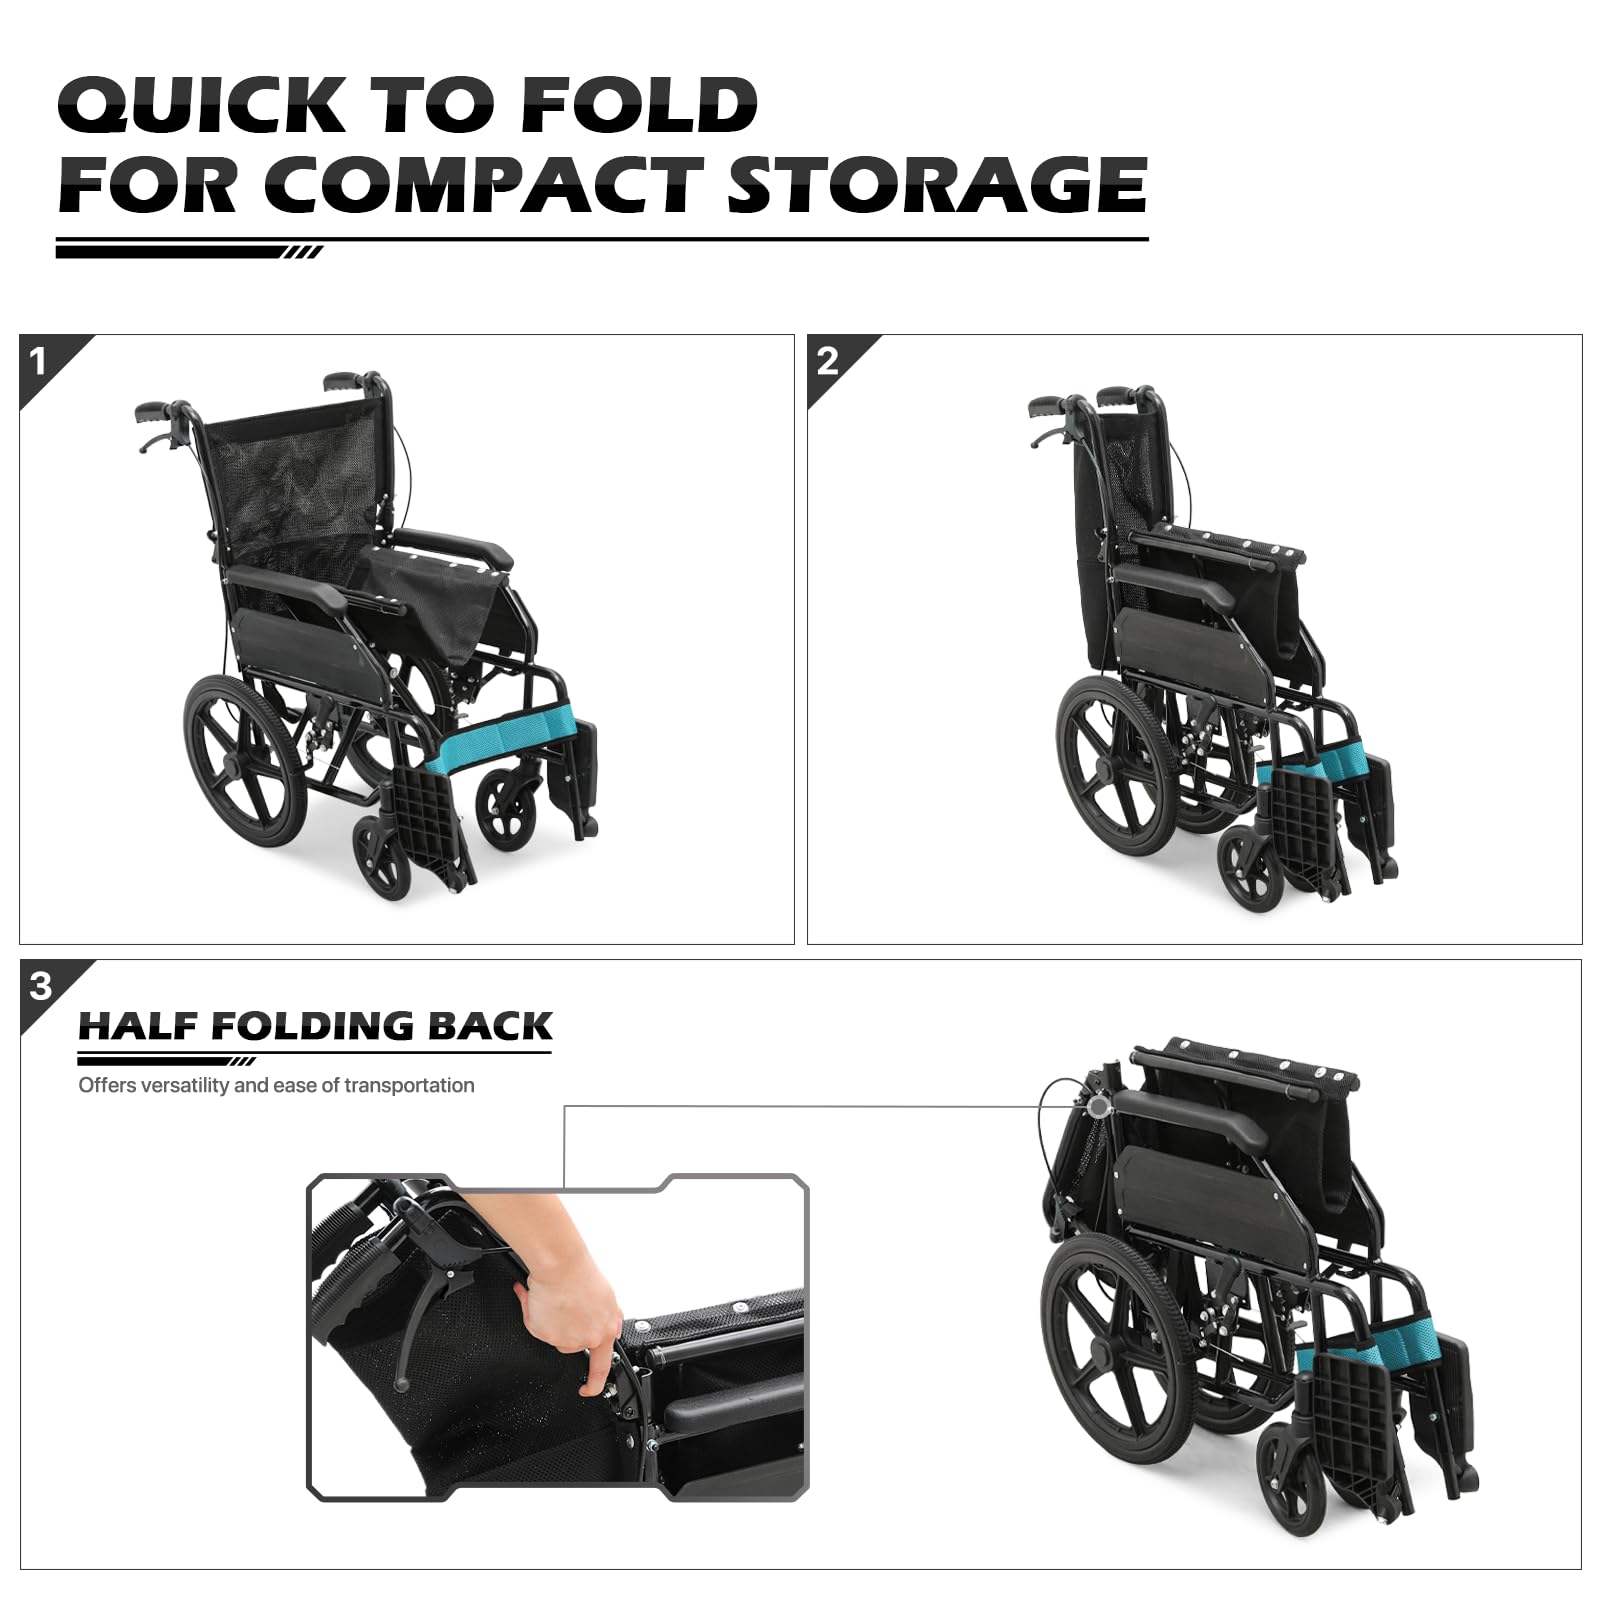 monicare Wheel Chair for Adults with Swing-Away Footrest and Loop-Lock Handbrakes 17.5 inch Seat Wheel Chair 15